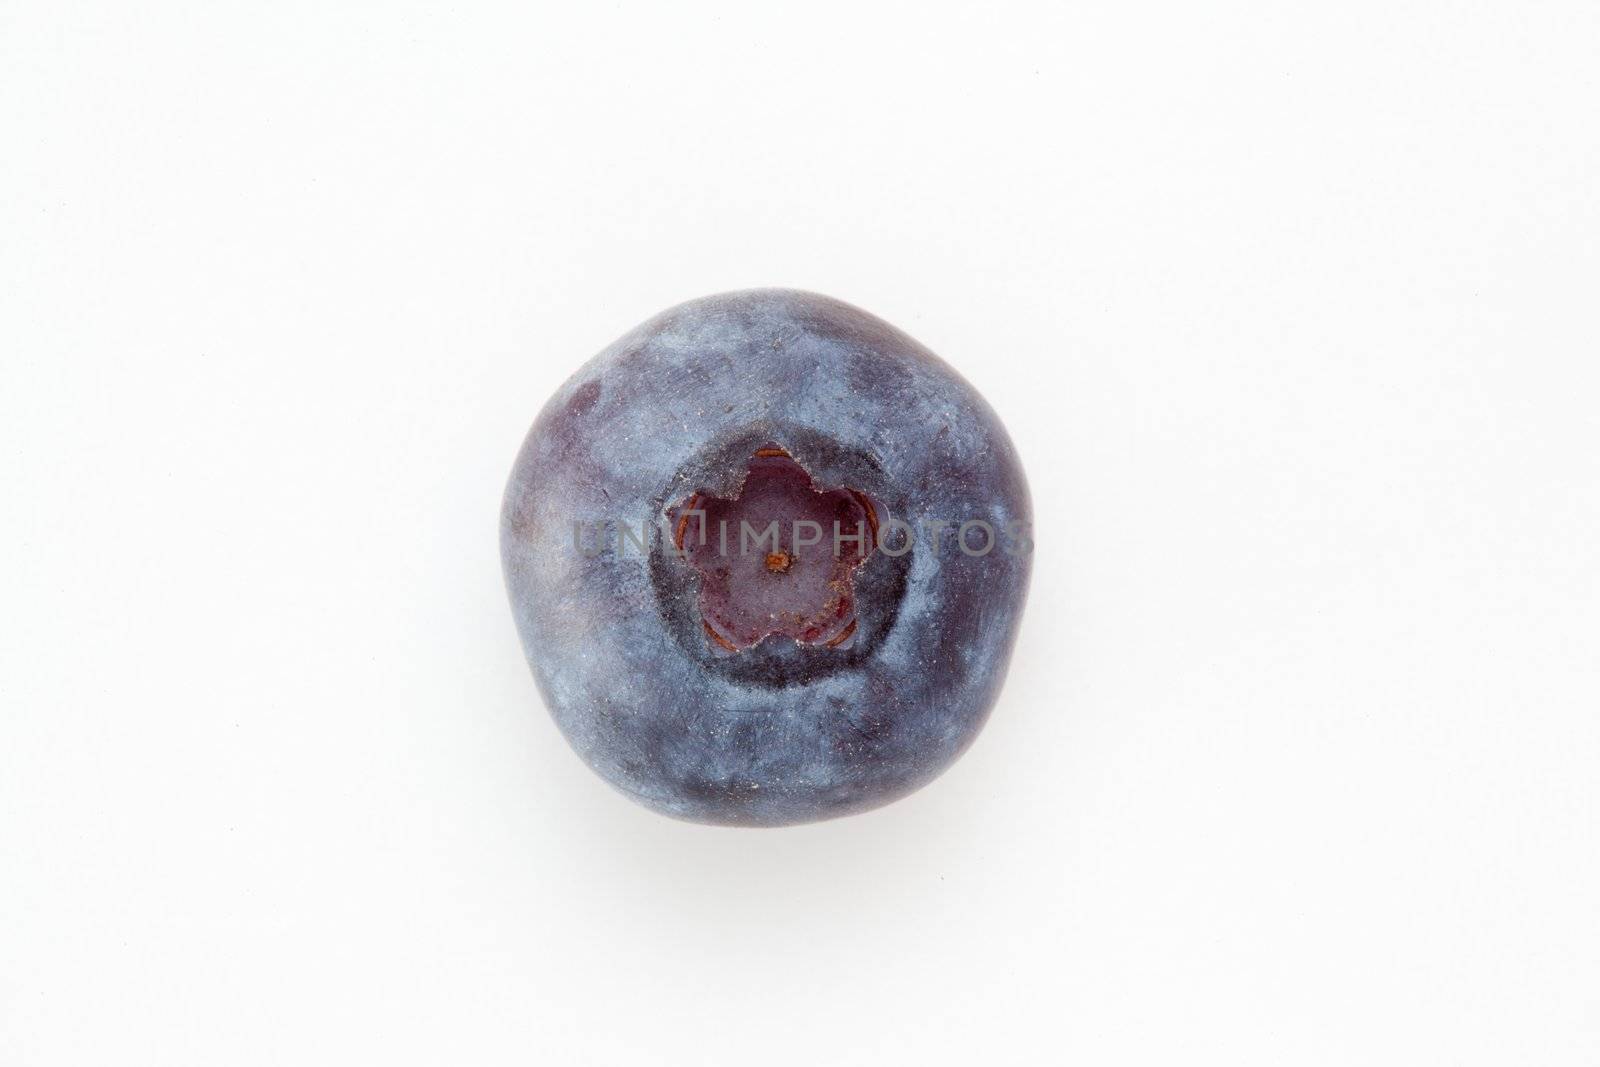 Blueberry against a white background